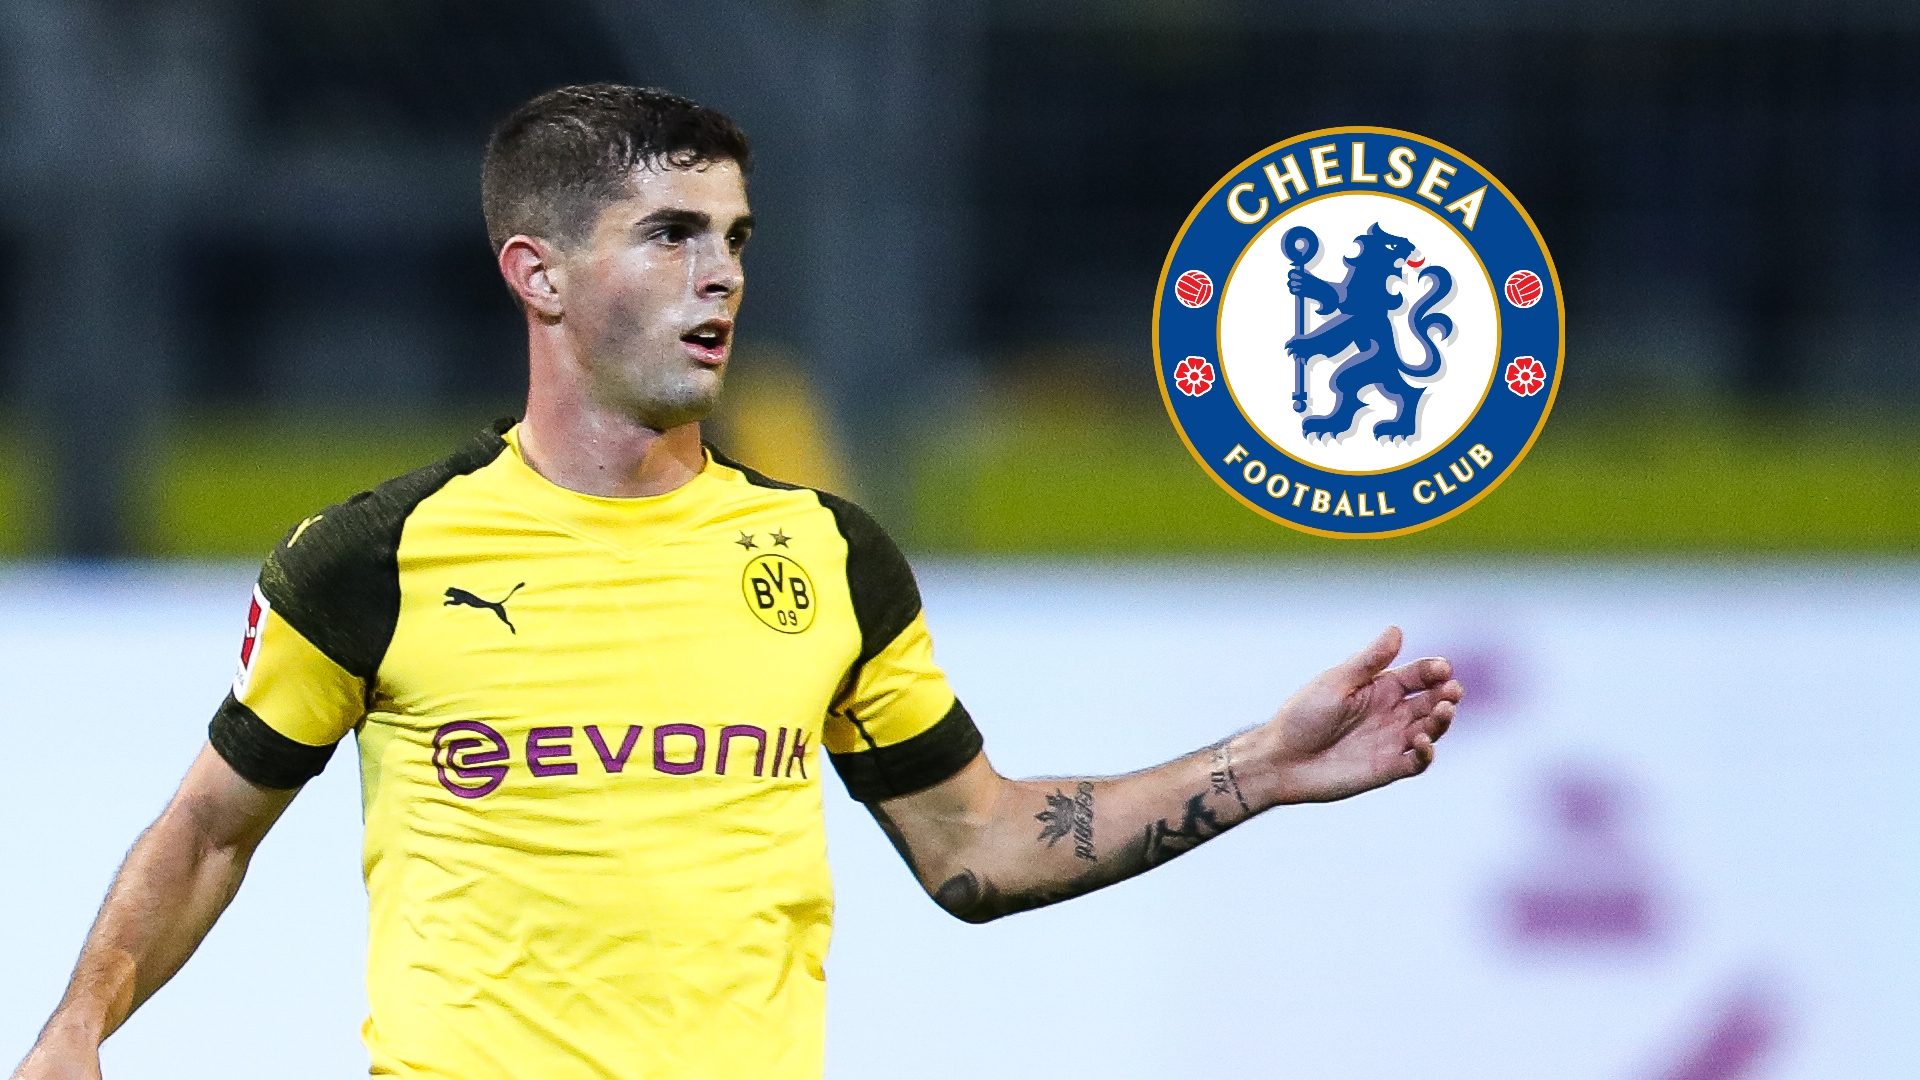 Chelsea's £58 million signing Pulisic can prove himself worth every